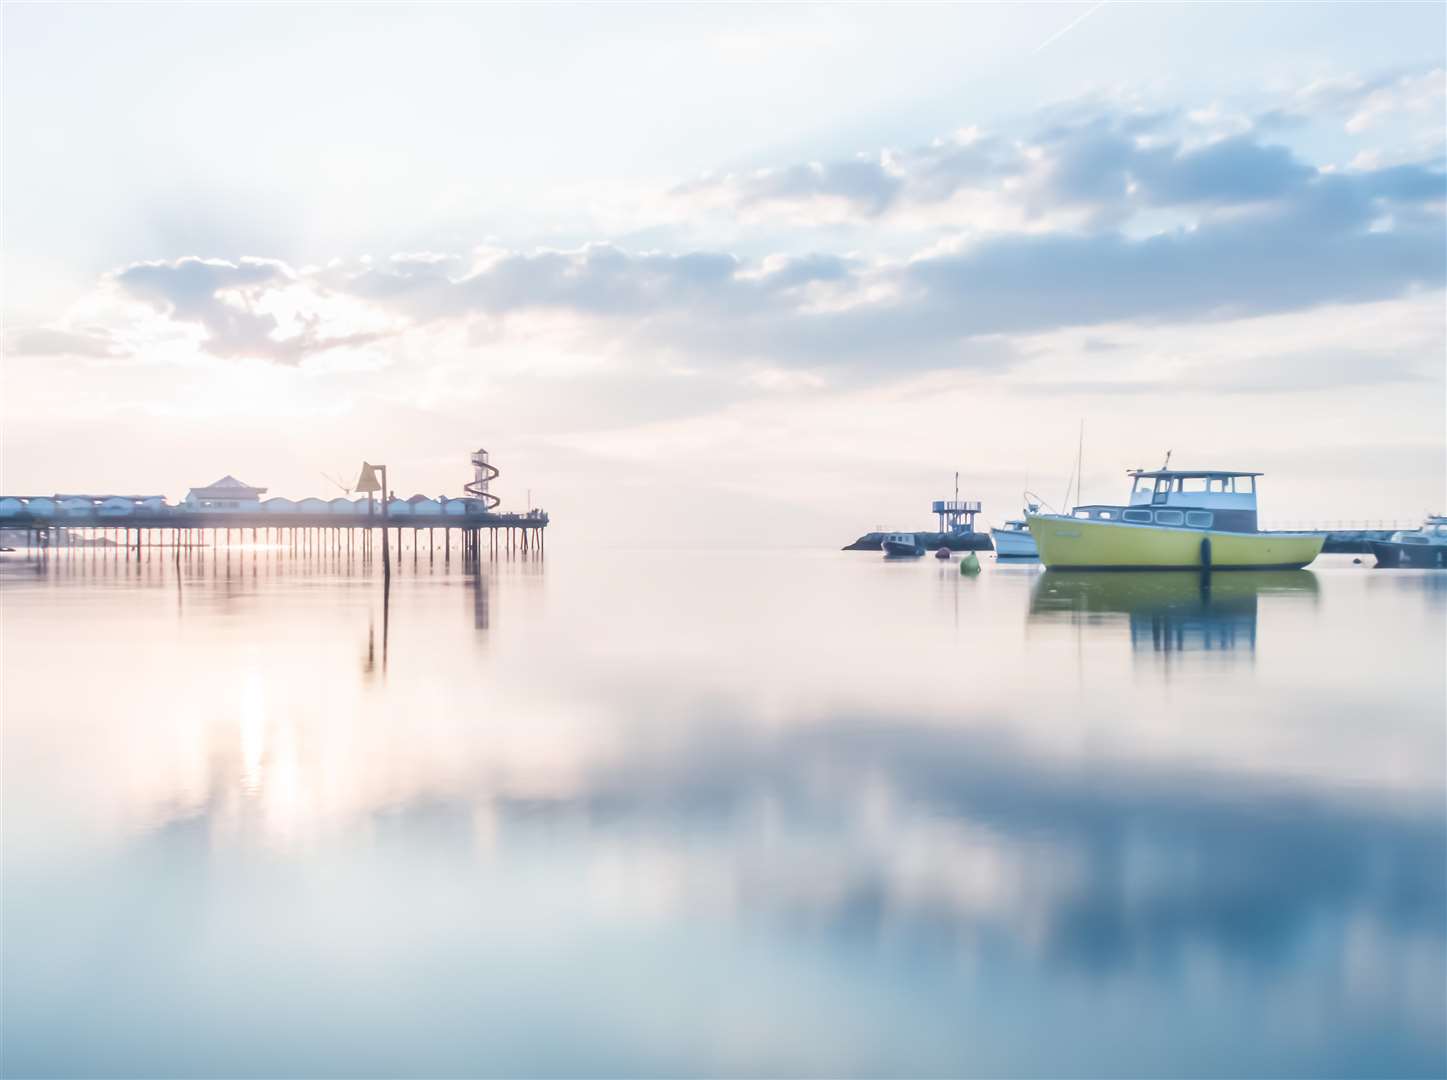 Daniel Russell's dreamy, water colour style image of Herne Bay harbour won our 2018 competition